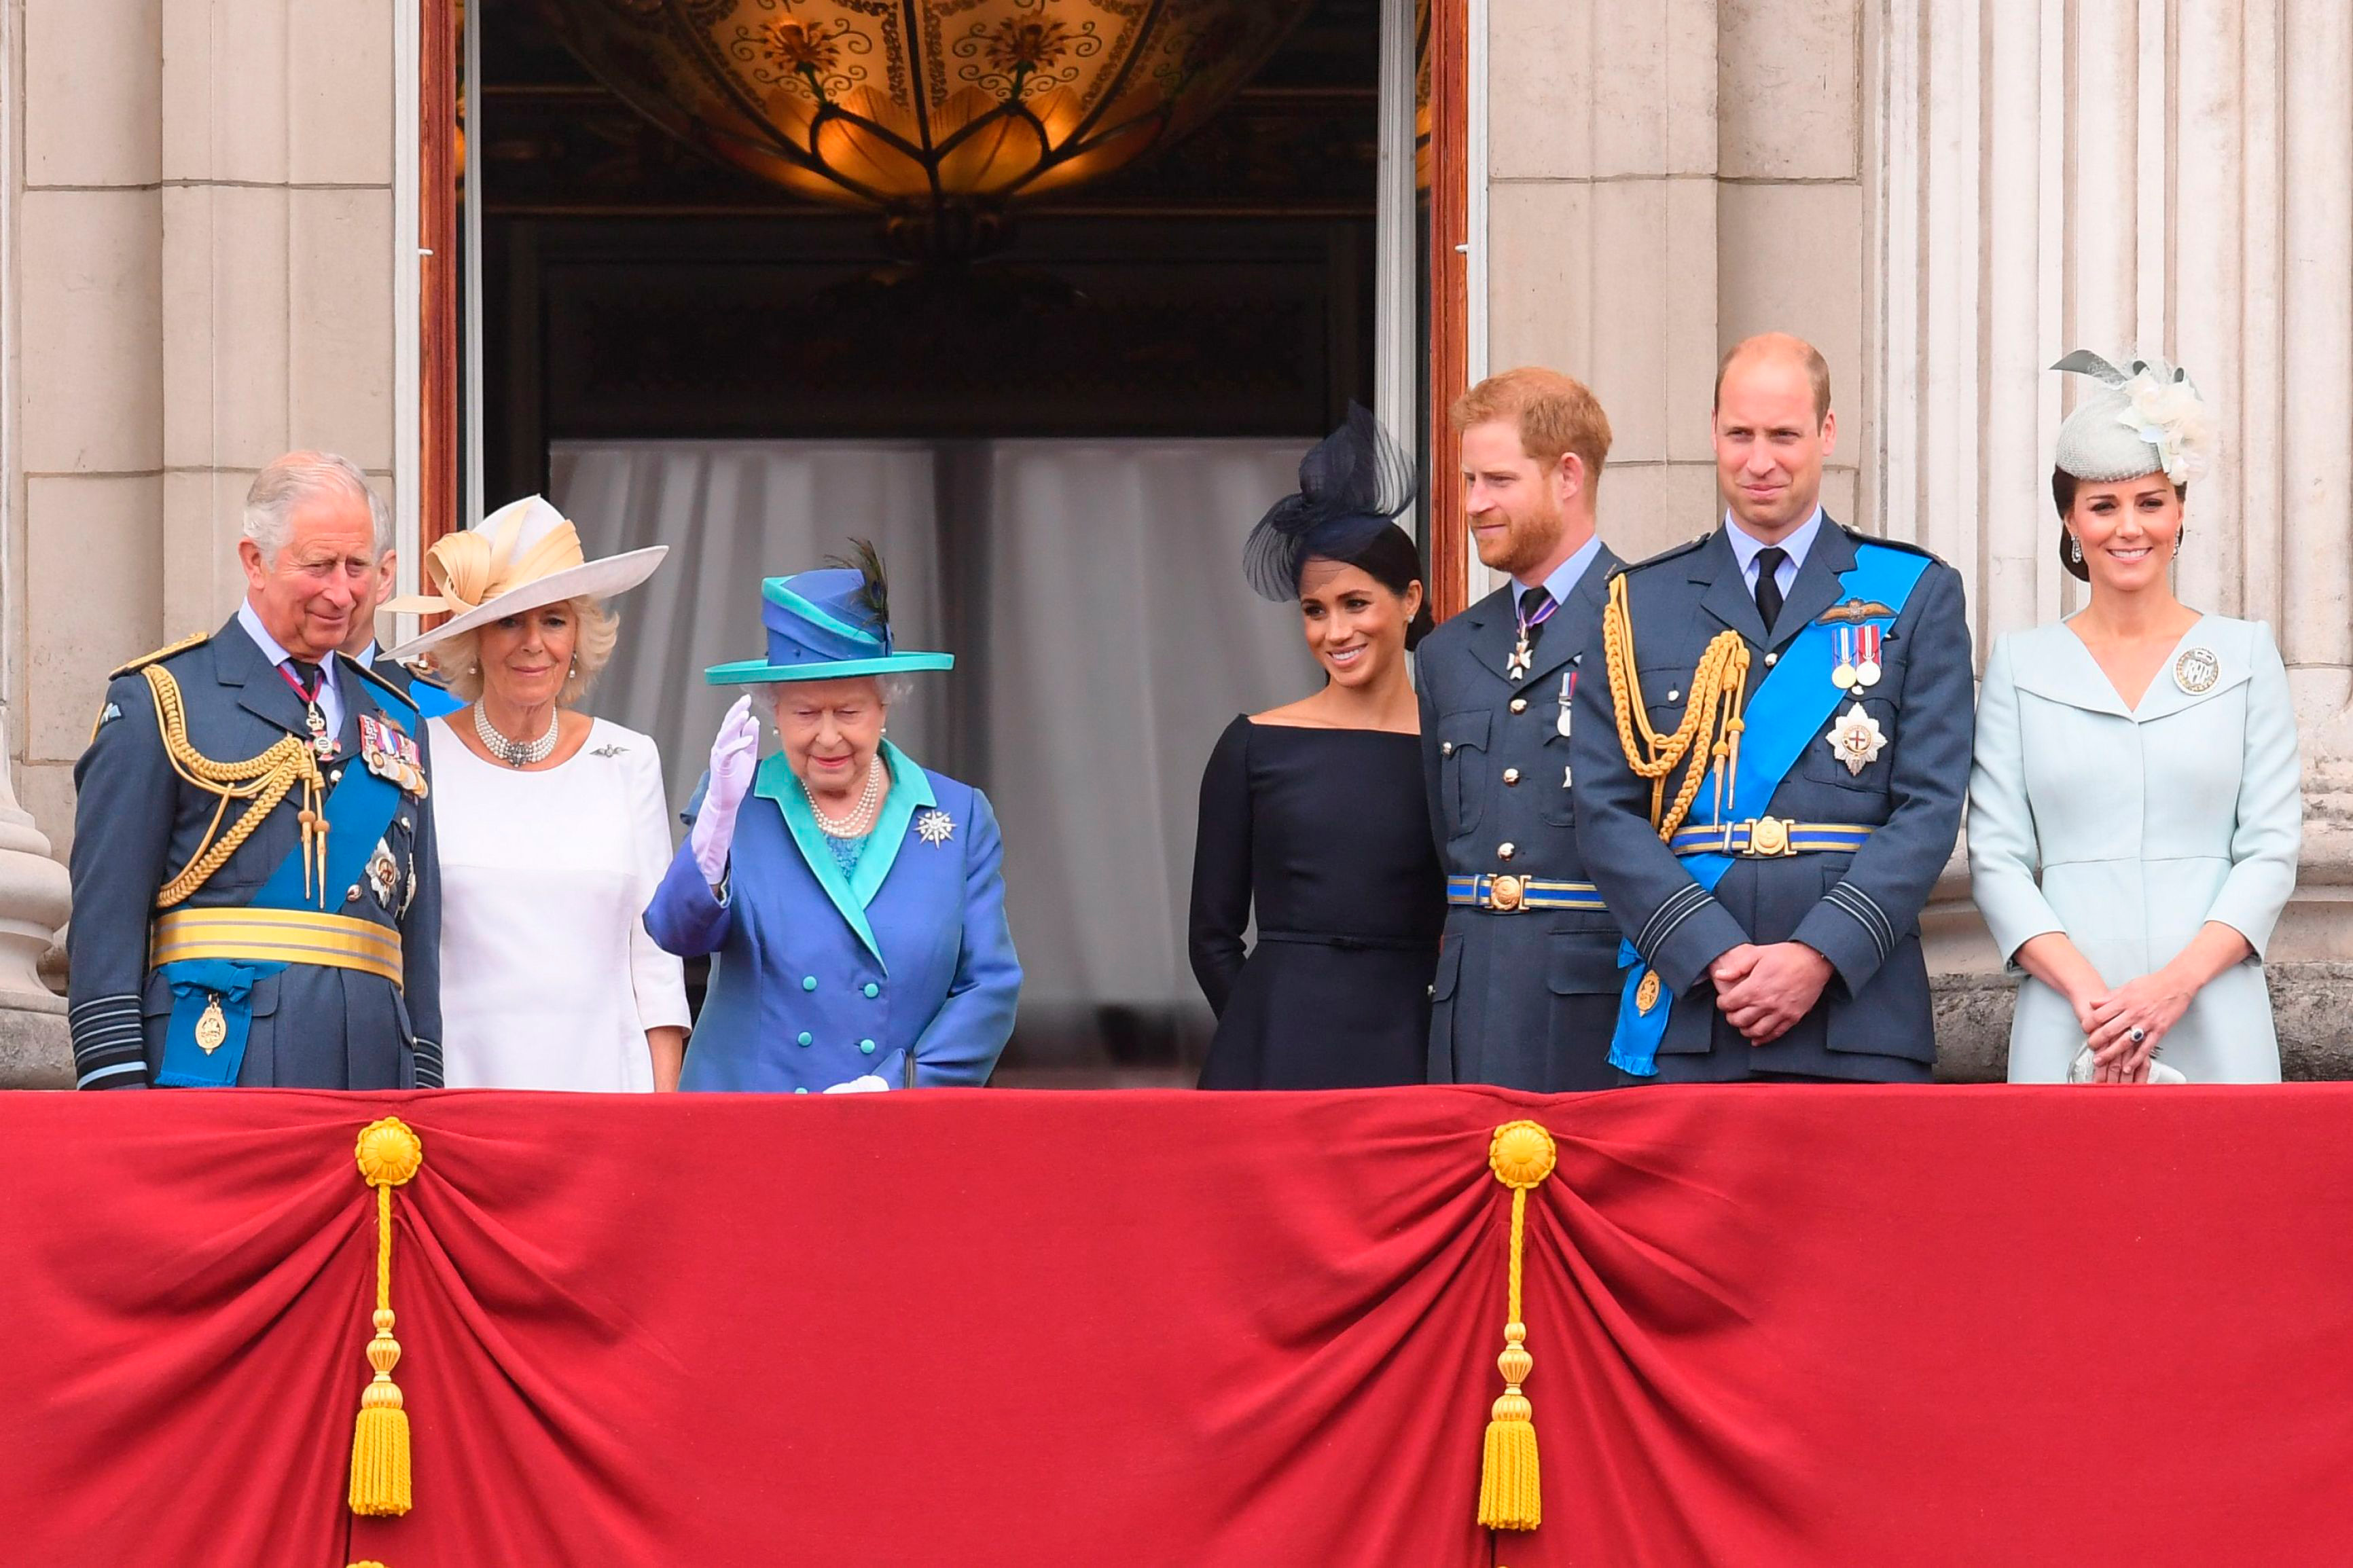 Charles, Camilla, Queen Elizabeth II, Meghan, Prince Harry, Prince William and Kate (David Fisher/Shutterstock)